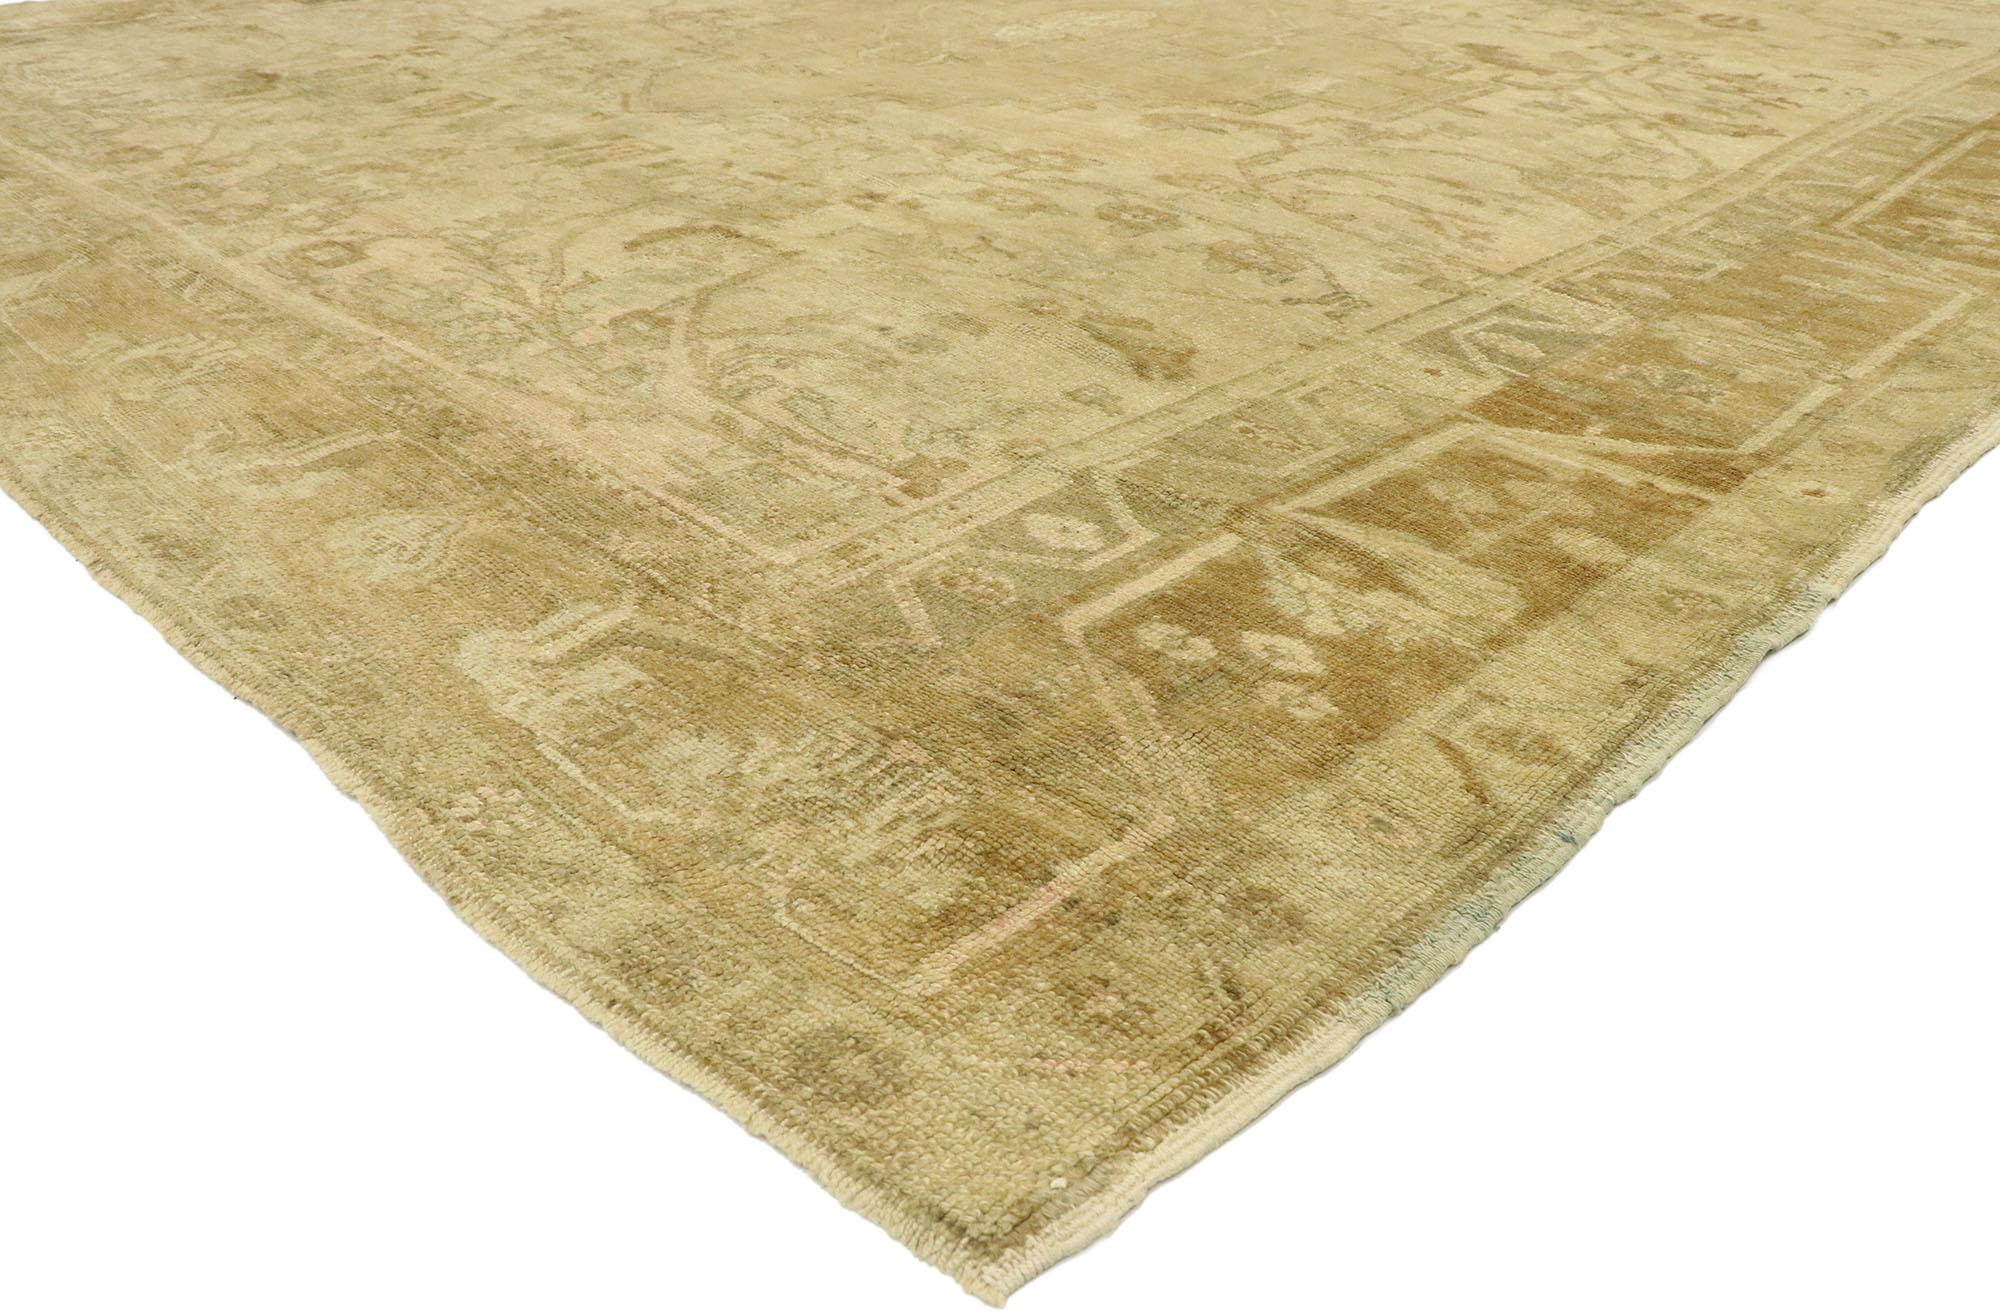 76602, antique Turkish Oushak rug with rustic French cottage style. Effortless beauty and feminine connotations meet soft, bespoke vibes with French cottage style in this hand knotted wool antique Turkish Oushak rug. The antique washed field